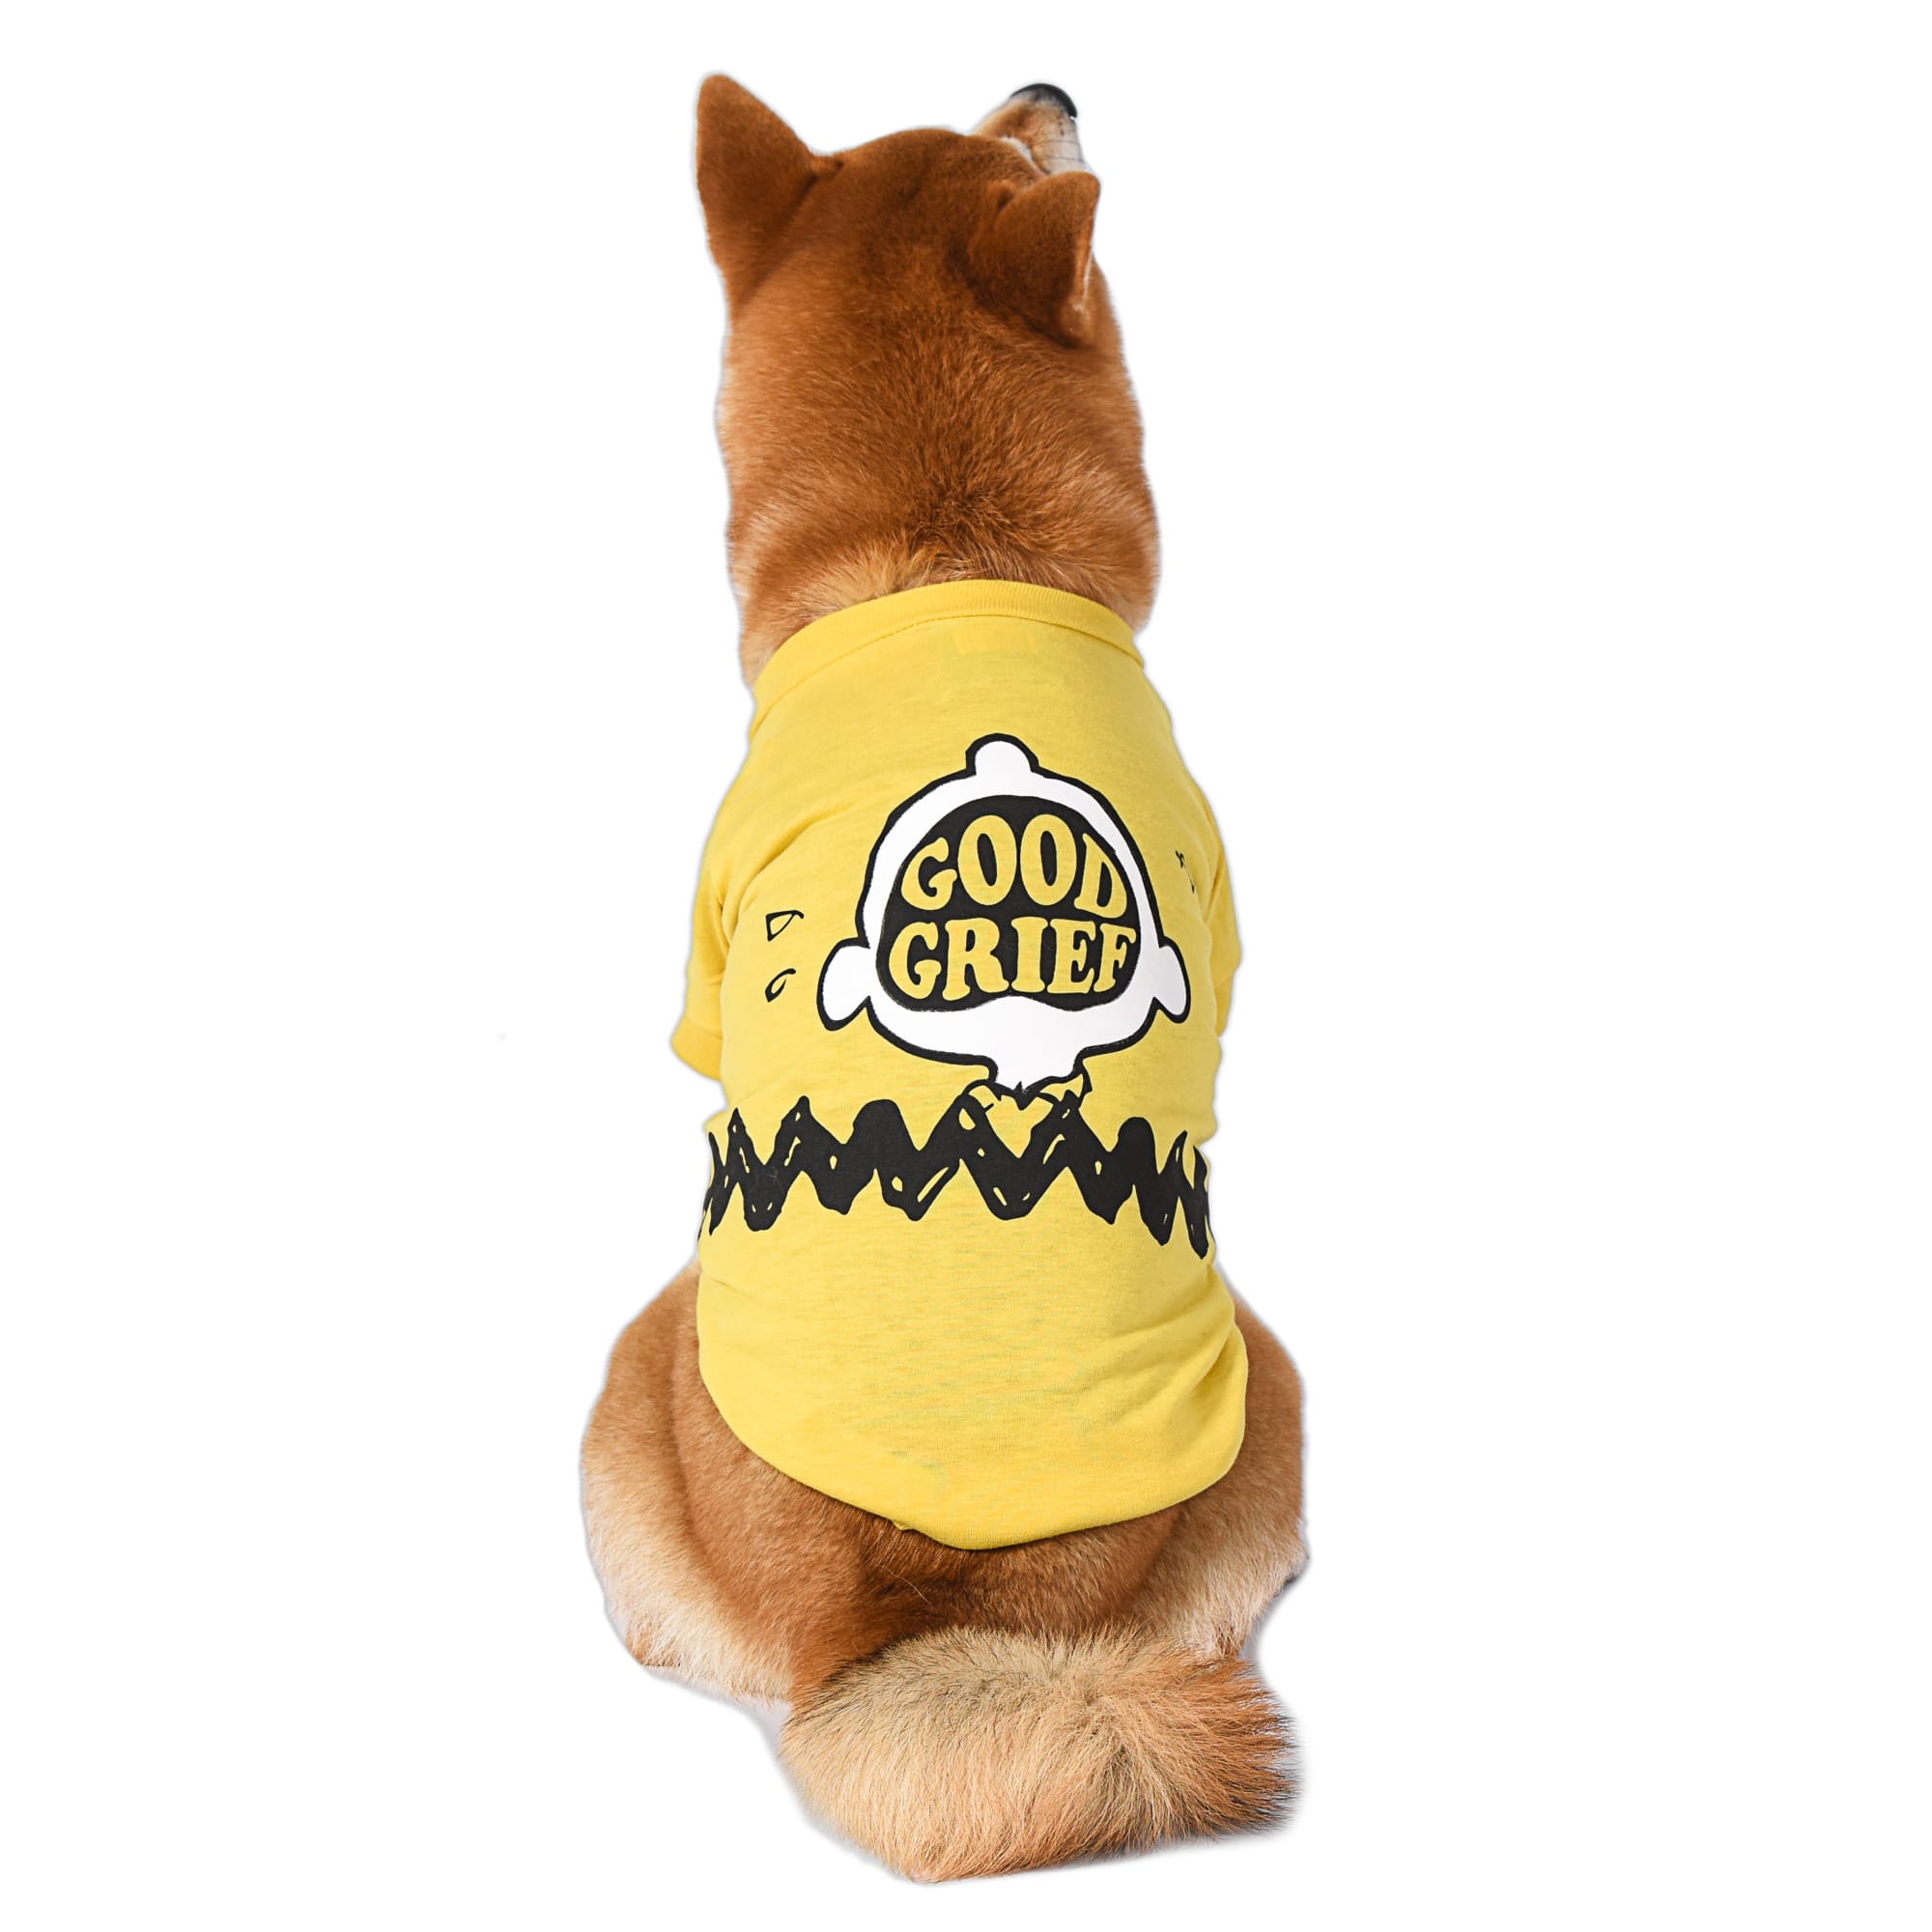 Fetch for Pets Peanuts Yellow Good Grief Dog T Shirt, Medium